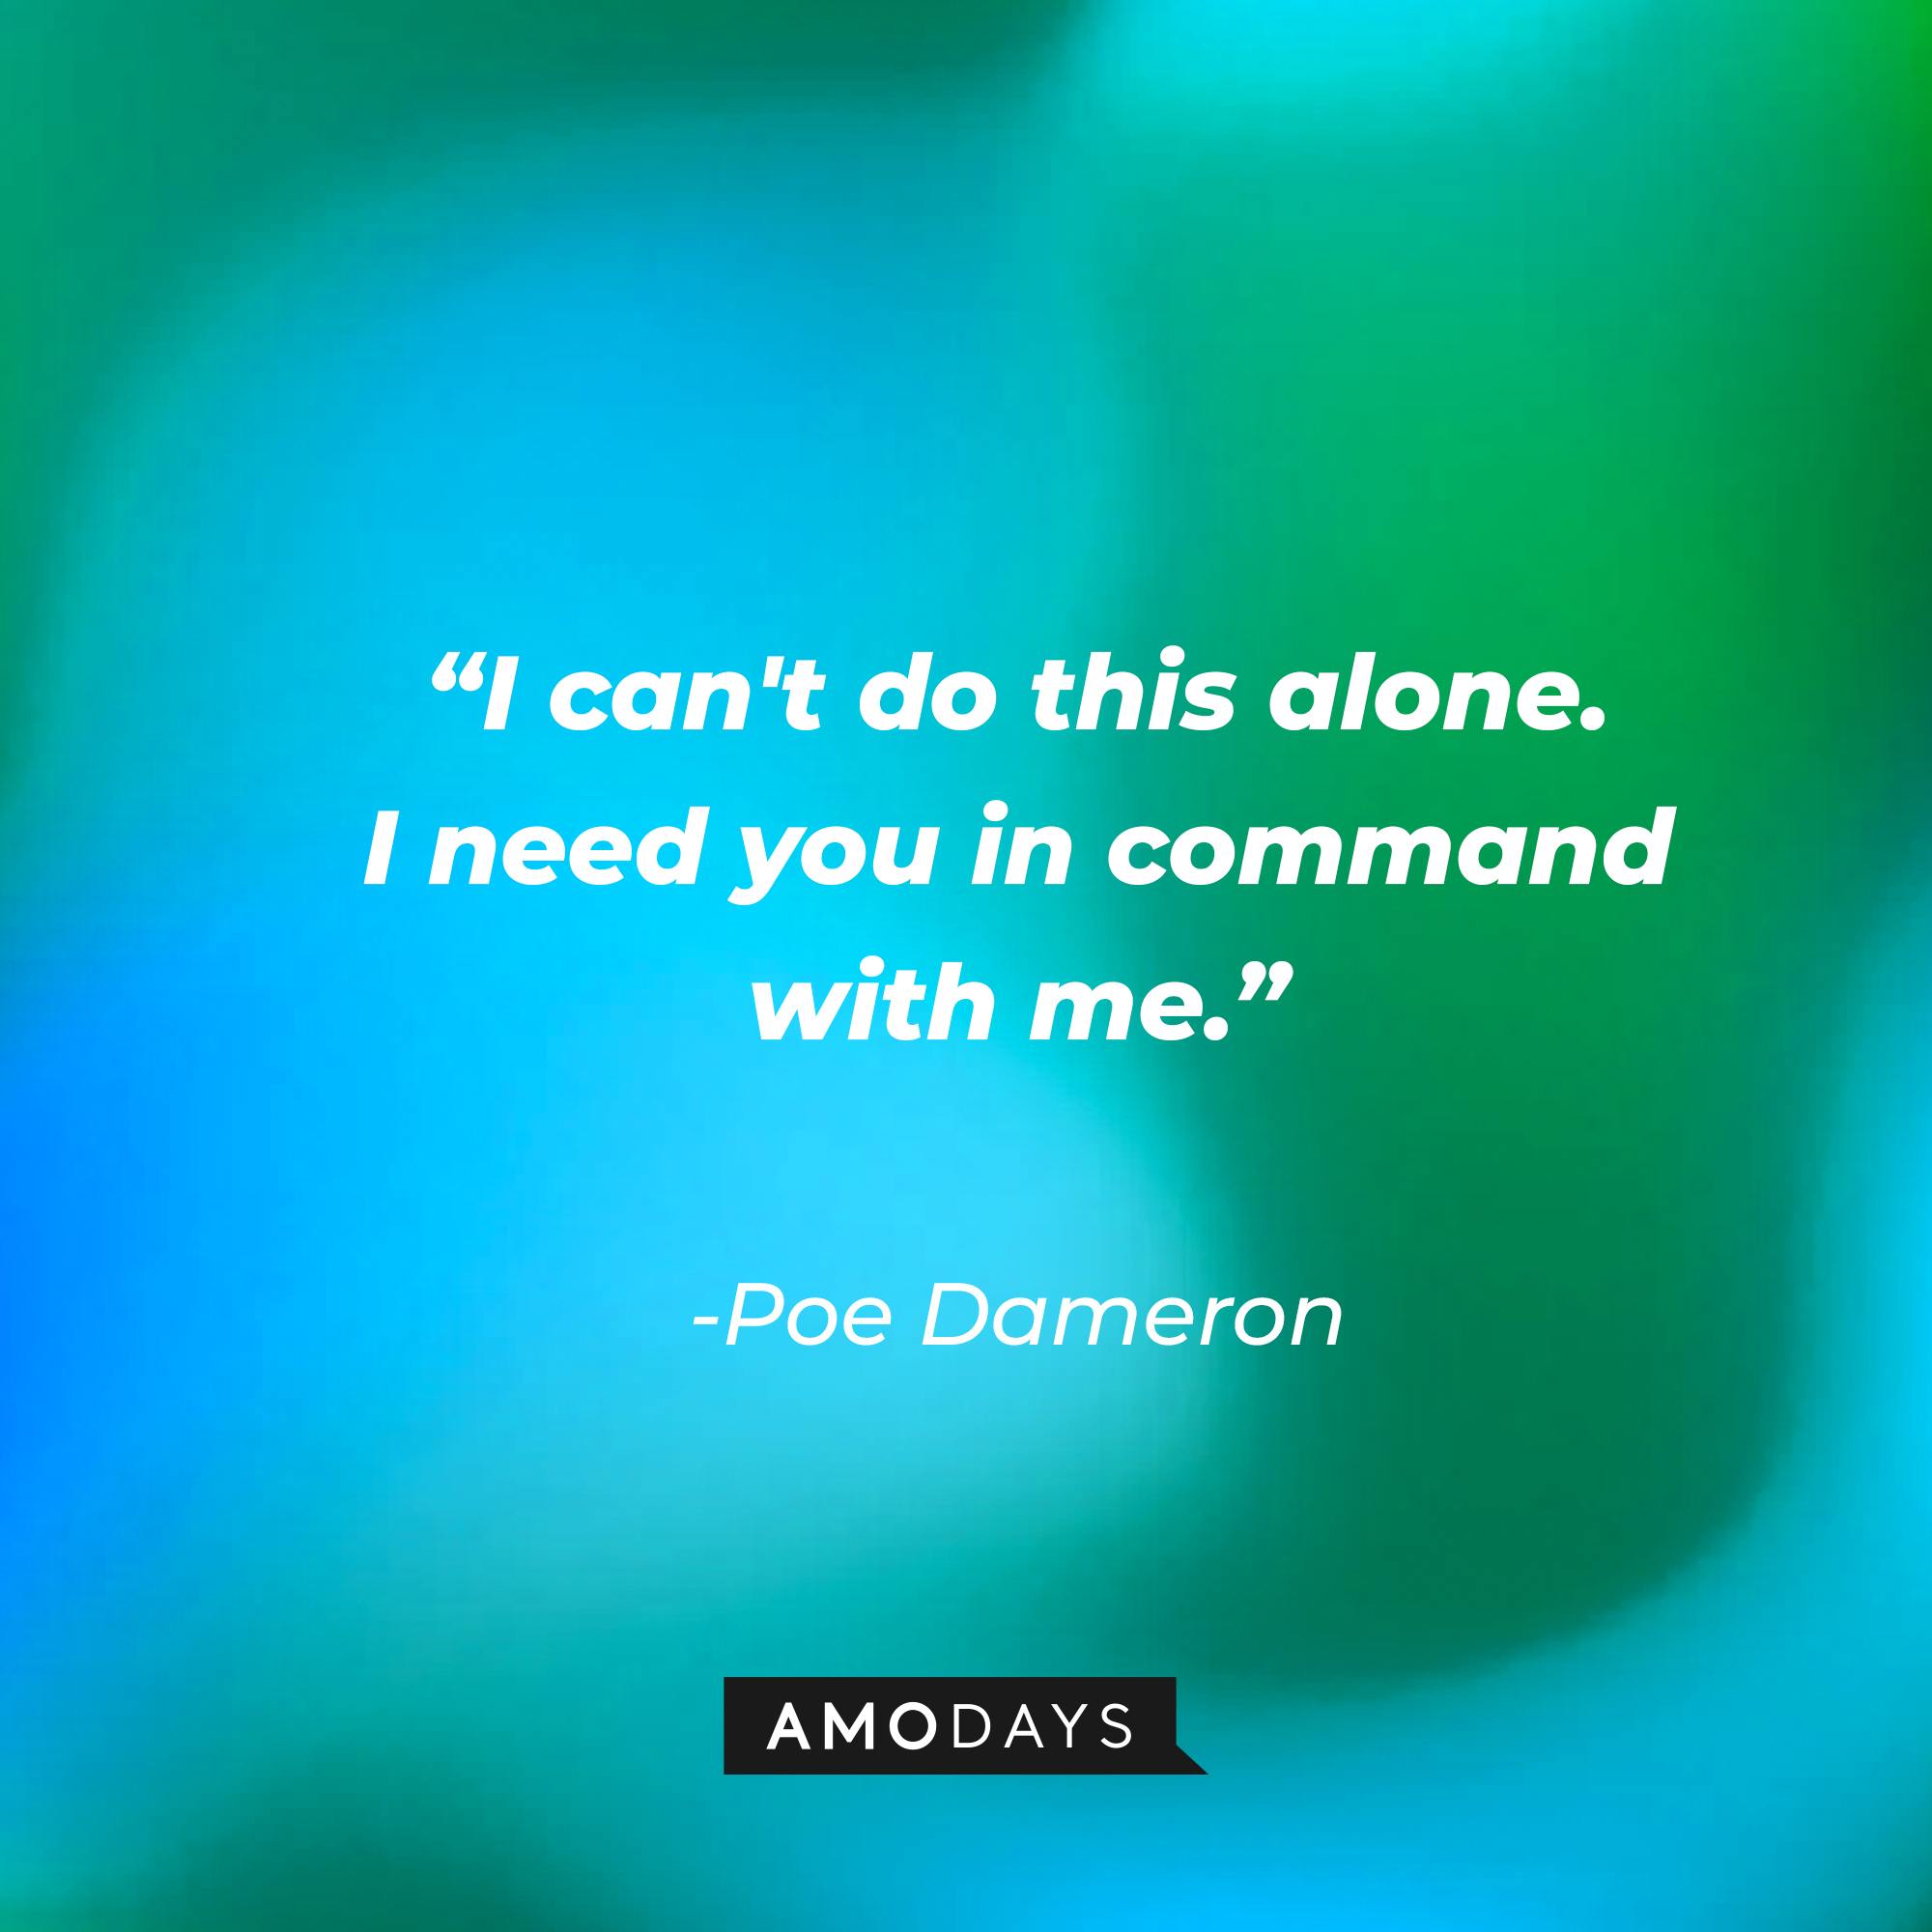 Poe Dameron’s quote: "I can't do this alone. I need you in command with me." | Source: AmoDays